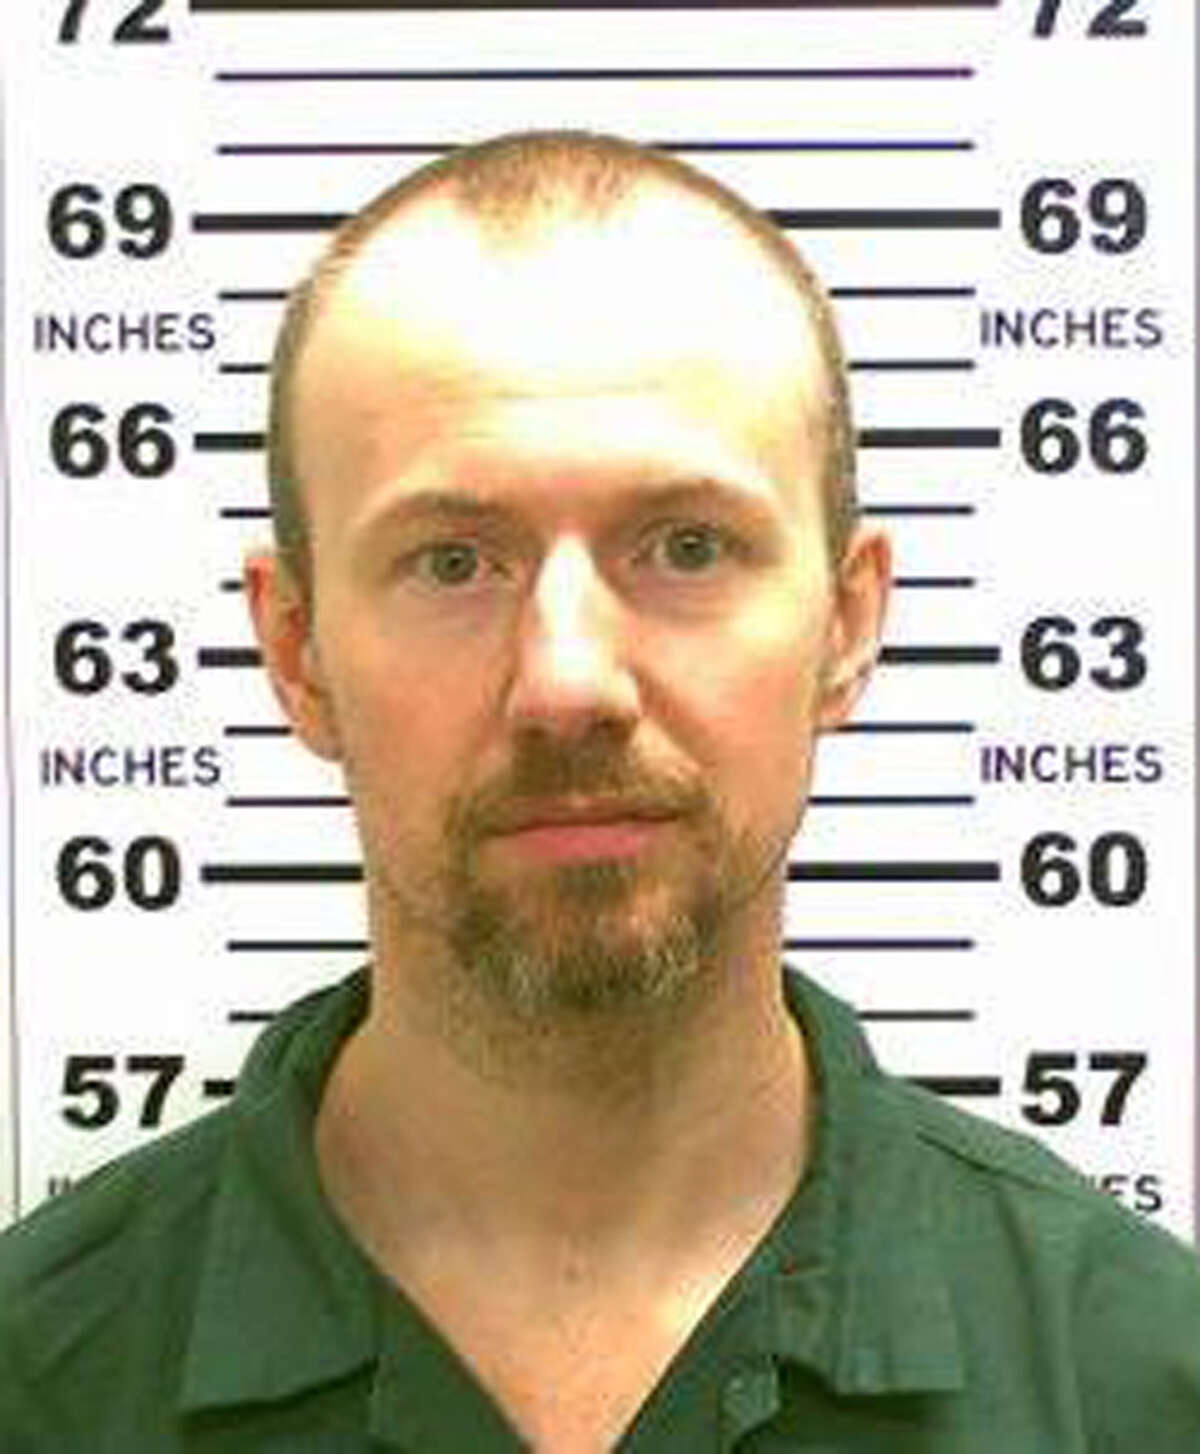 This May 21, 2015 photo released by the New York State Police shows David Sweat. (New York State Police via AP)